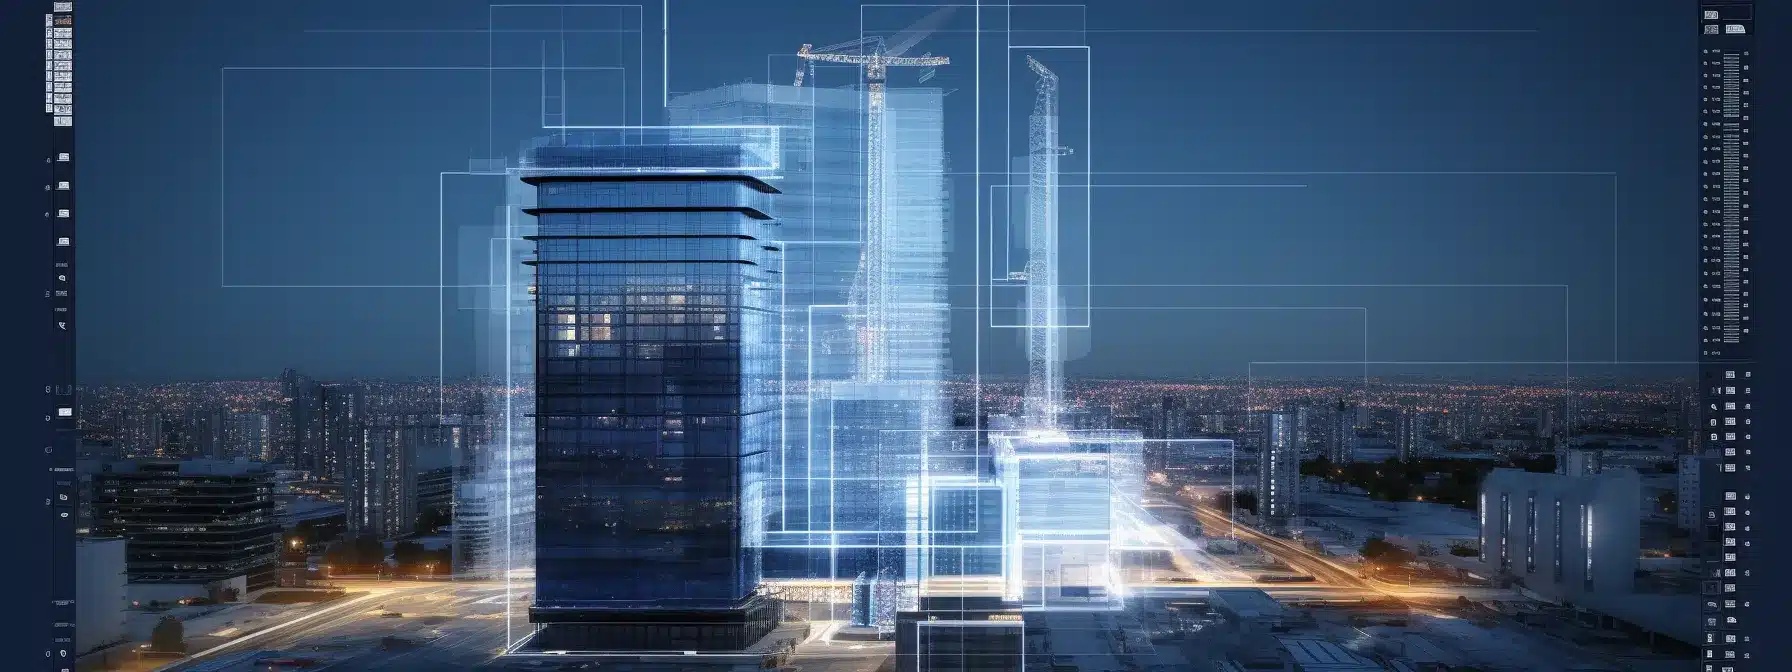 A Blueprint Being Transformed Into A Towering Skyscraper In A Bustling Cityscape.